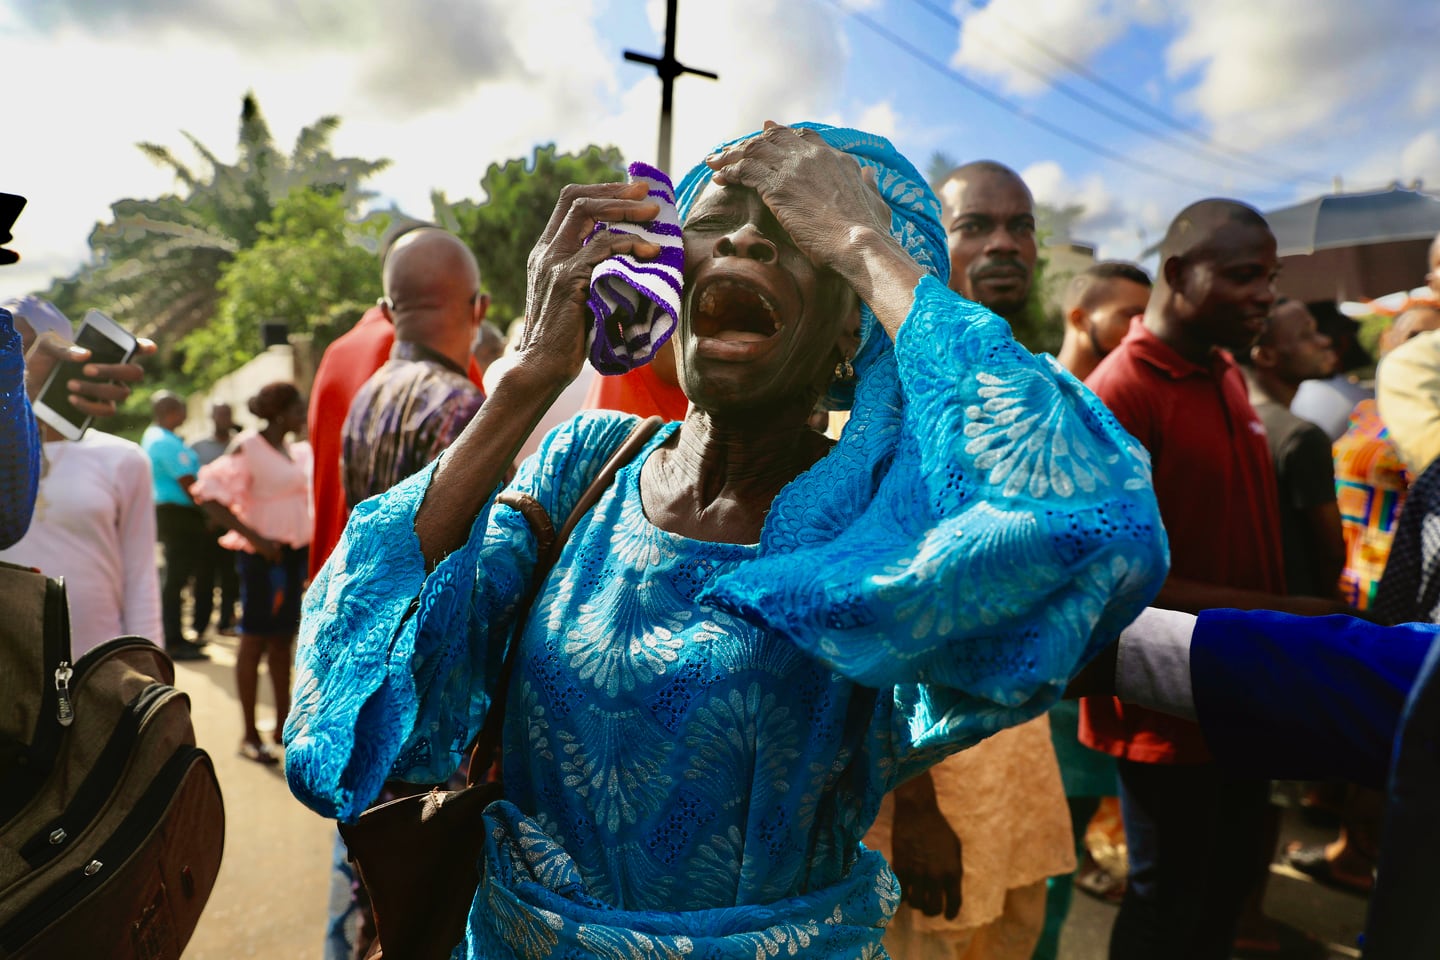 Members of Synagogue Church Of All Nations, mourn following the death of the founder T.B. Joshua, outside the church in Lagos, Nigeria Sunday, June 6, 2021. Temitope Balogun Joshua, one of Africa’s most popular televangelists who was known as T.B. Joshua, has died. He was 57. (AP Photo)